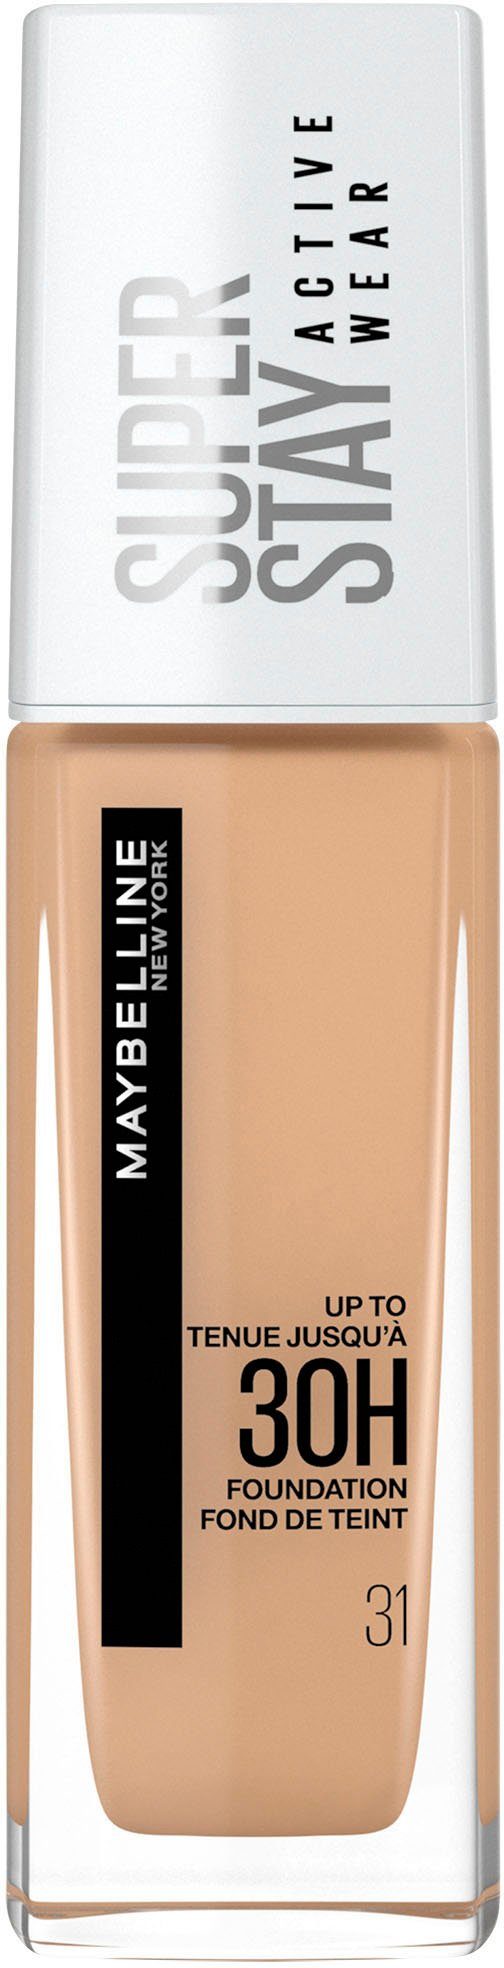 Nude Wear Warm Foundation 31 Stay MAYBELLINE Super Active NEW YORK